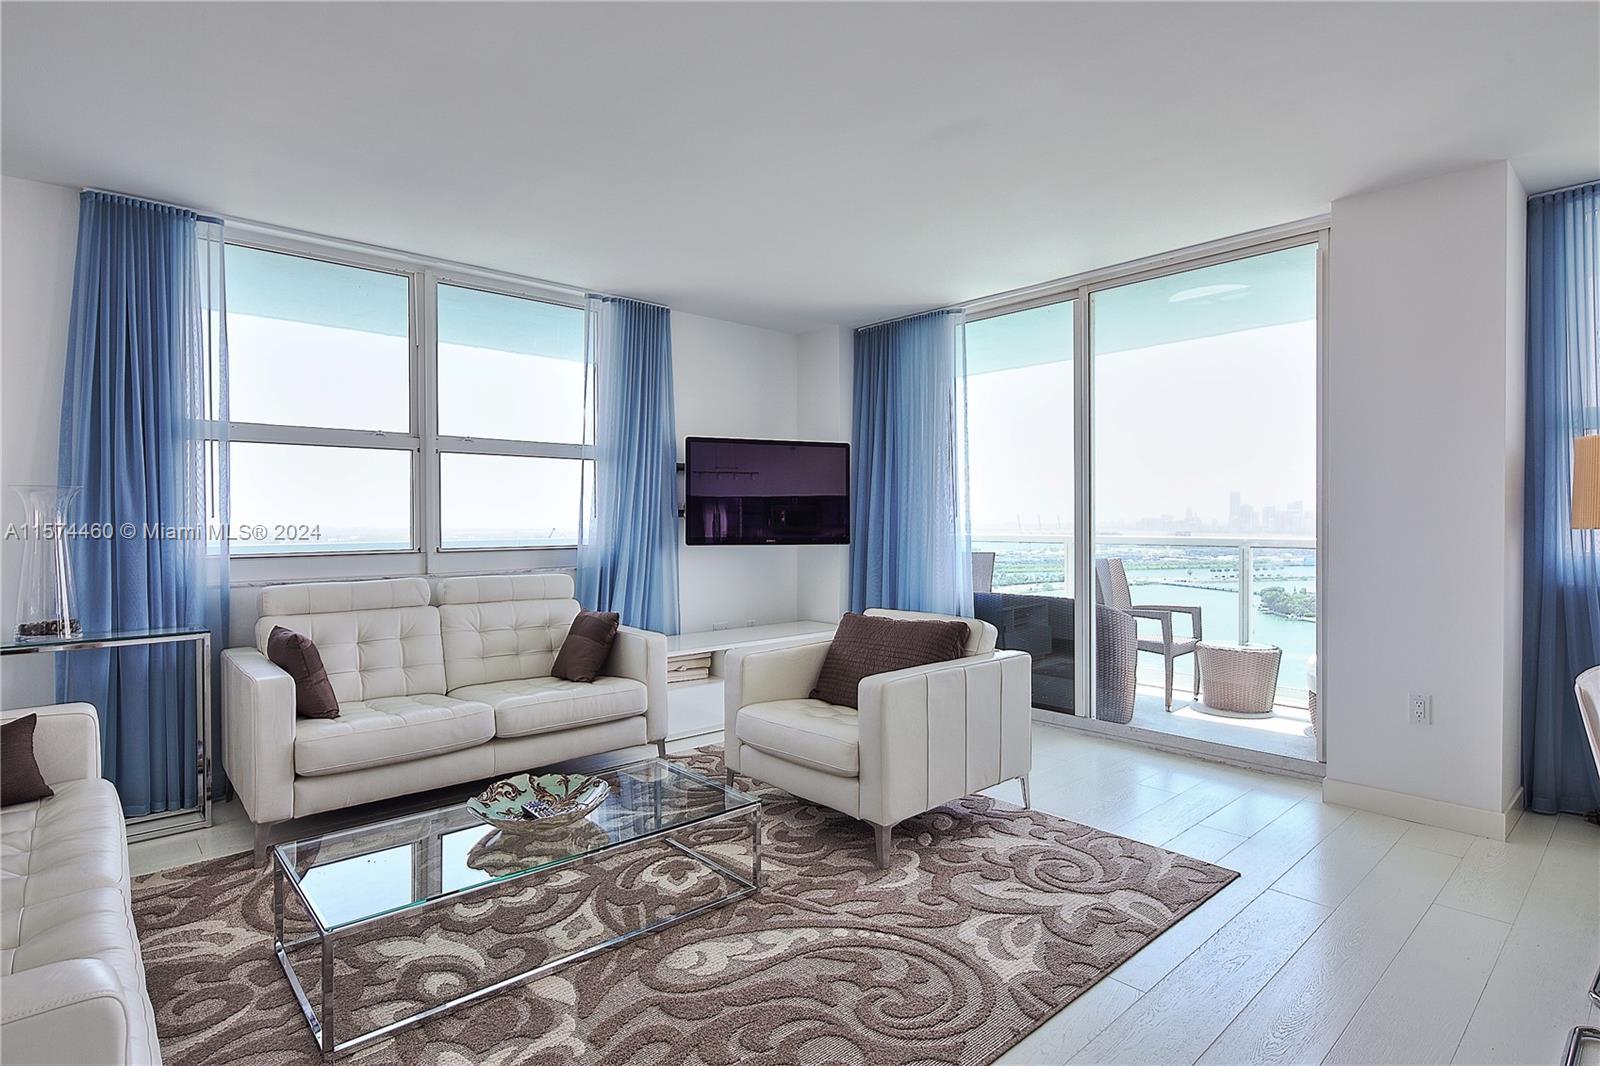 Luxury Corner Unit at the Floridian. Breathtaking view facing the intracoastal bay and Ocean. Italia